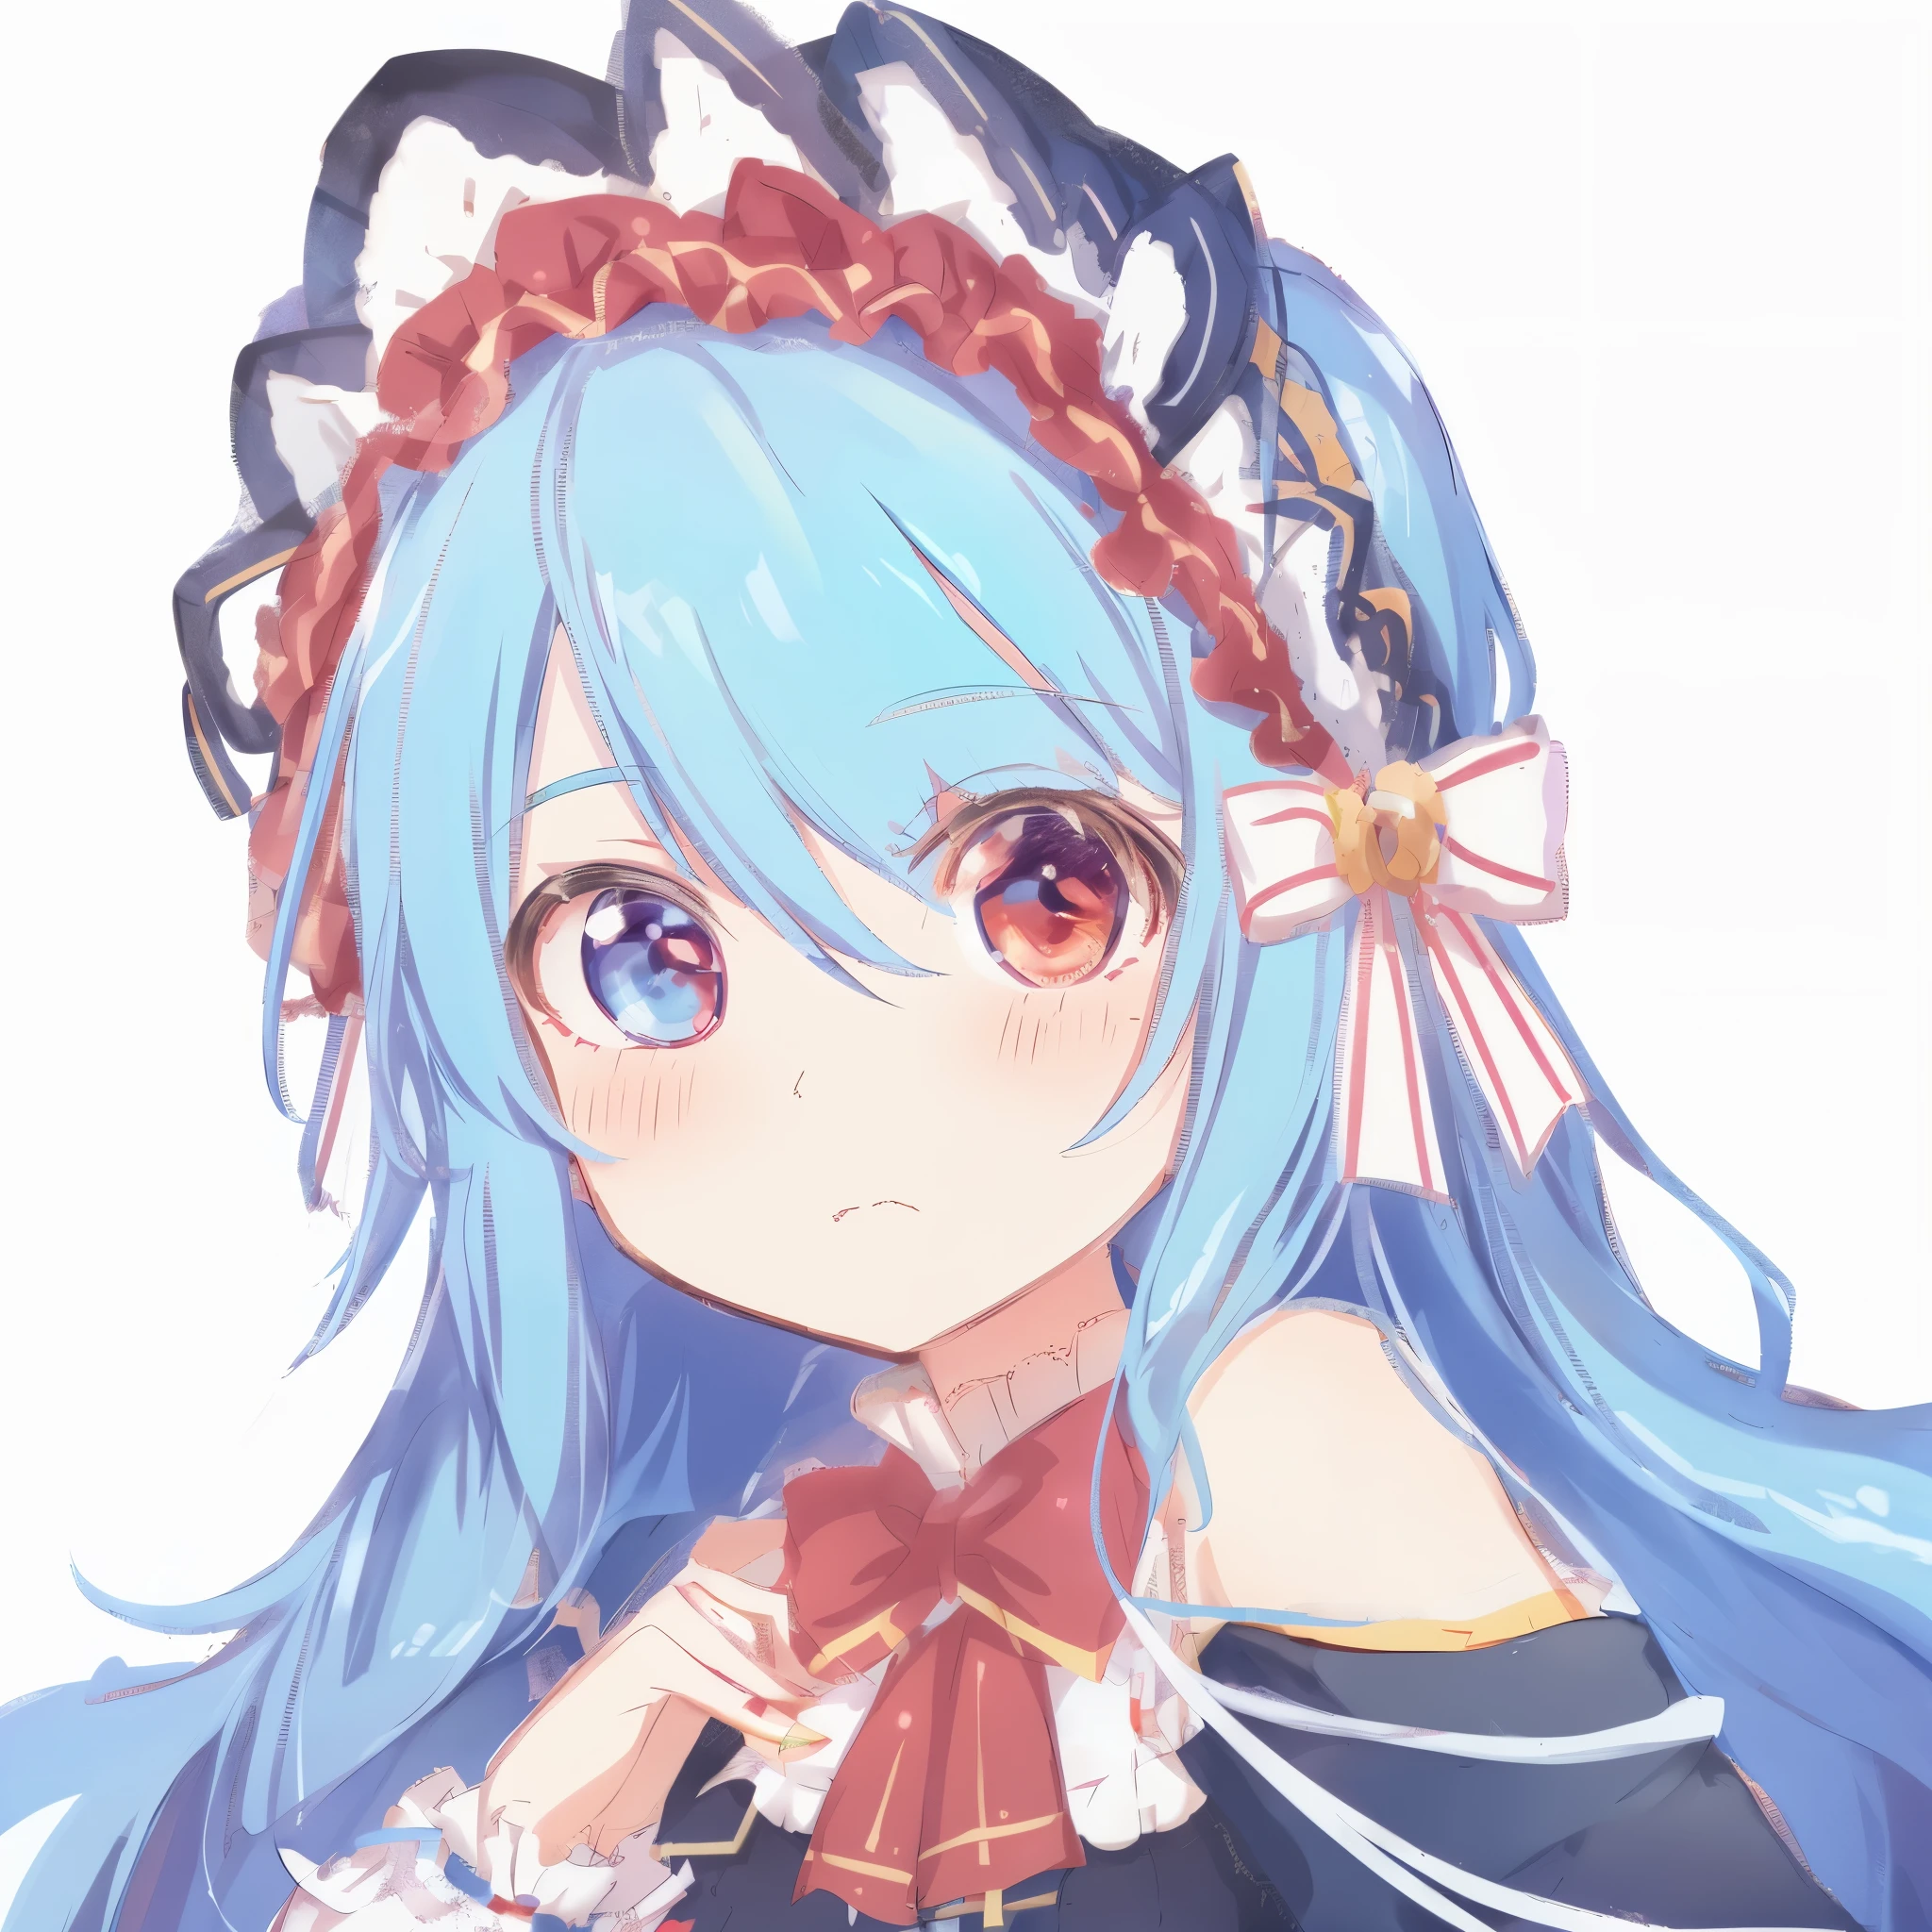 anime girl，blue hair，red bow，blue dress, I will deny this, Anime cute art style, mikudayo, Change, zero art, hatsune miku portrait,  Change, anime style 4 k, by kamaguka, Drawing in animation artist studio, anime style. 8k, Produced by Anime Painter Studio